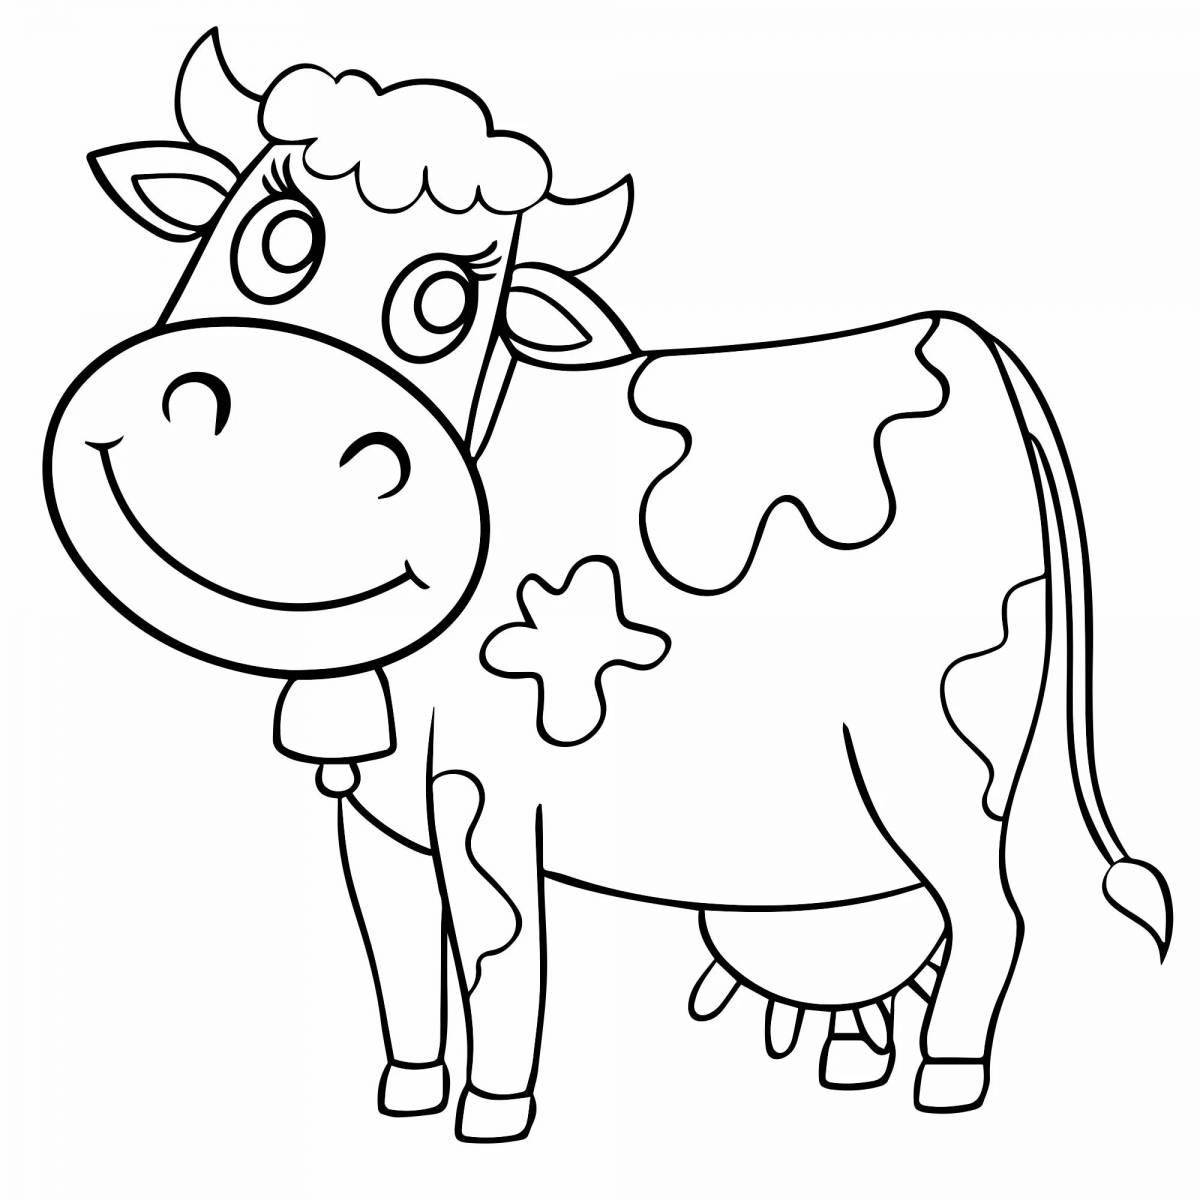 Creative cow coloring book for kids